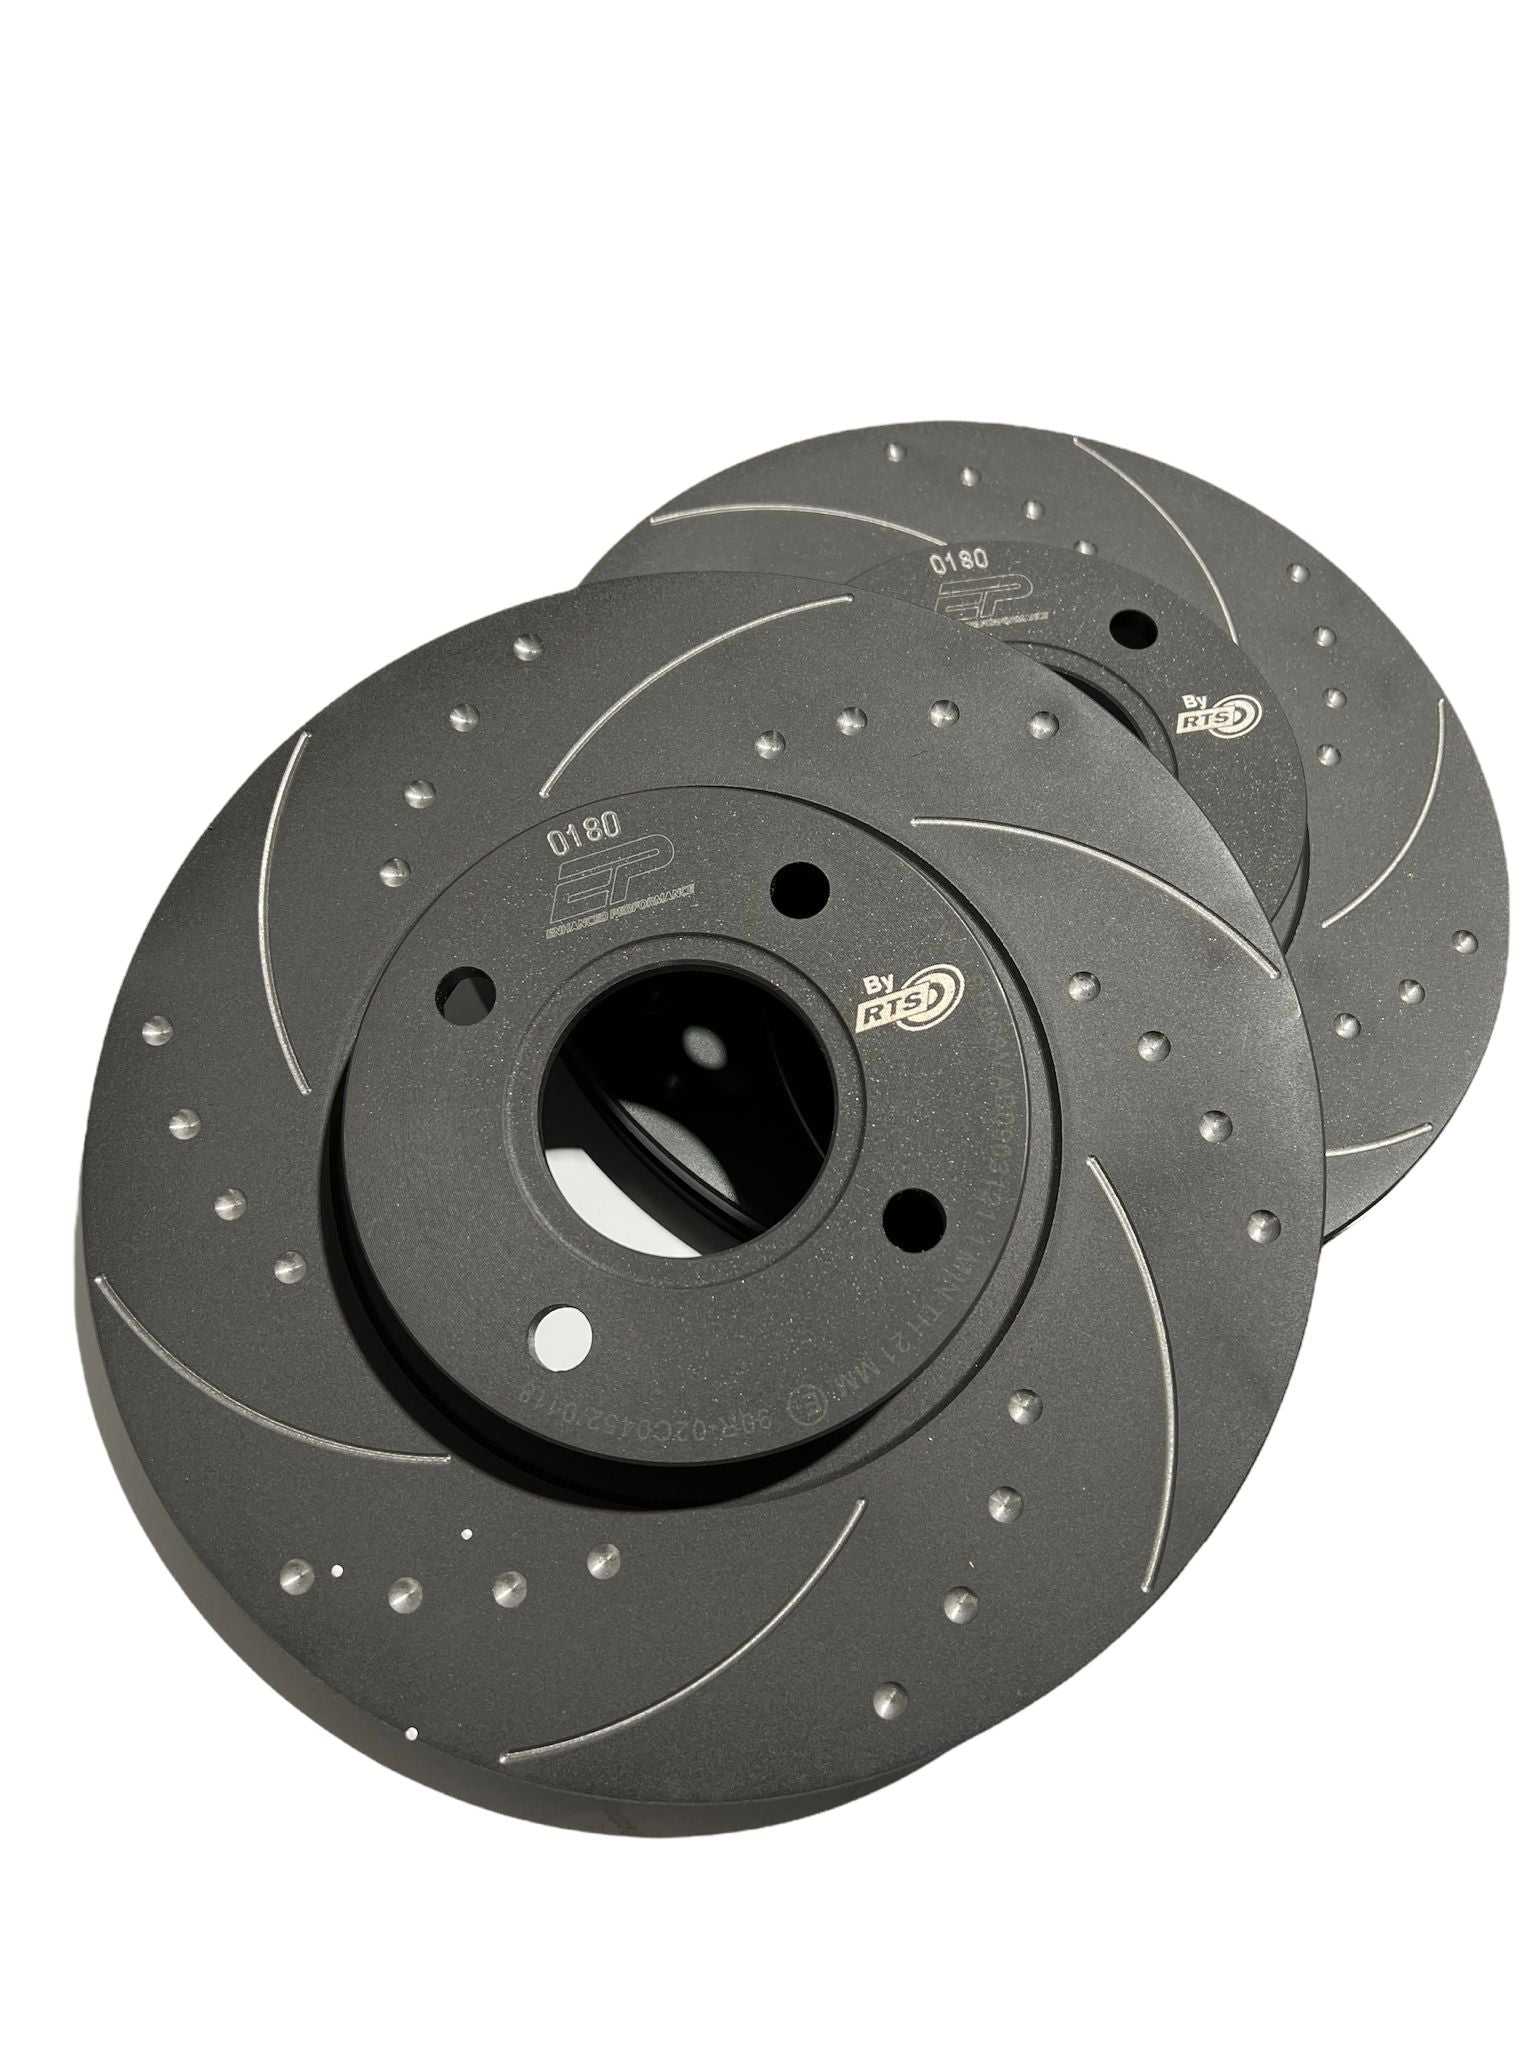 Enhanced Performance, Enhanced Performance (By RTS) Brake Disc Upgrade - MK7 Fiesta ST - Dimpled & Grooved